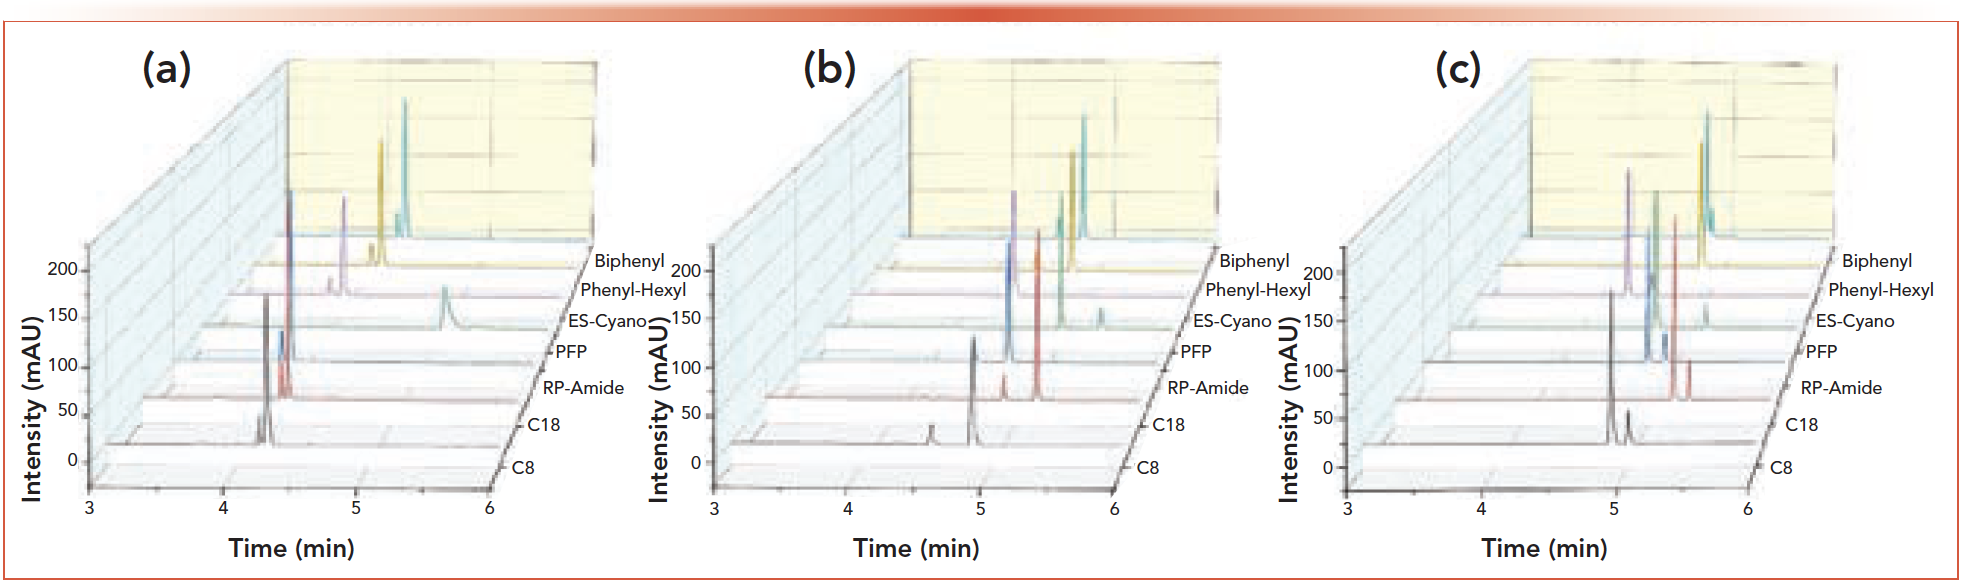 FIGURE 3: 2nd dimension chromatograms for the impurity screen of API 1. Chromatographic conditions are described within the text. (a) 0.1% TFA, (b) 25 mM ammonium acetate at pH 4.5, (c) 25 mM ammonium acetate at pH 6.8. Chromatogram (b) gave the best resolution between API and impurity. Of note is the reversal of elution order for the PFP column for the pH 4.5 mobile phase.